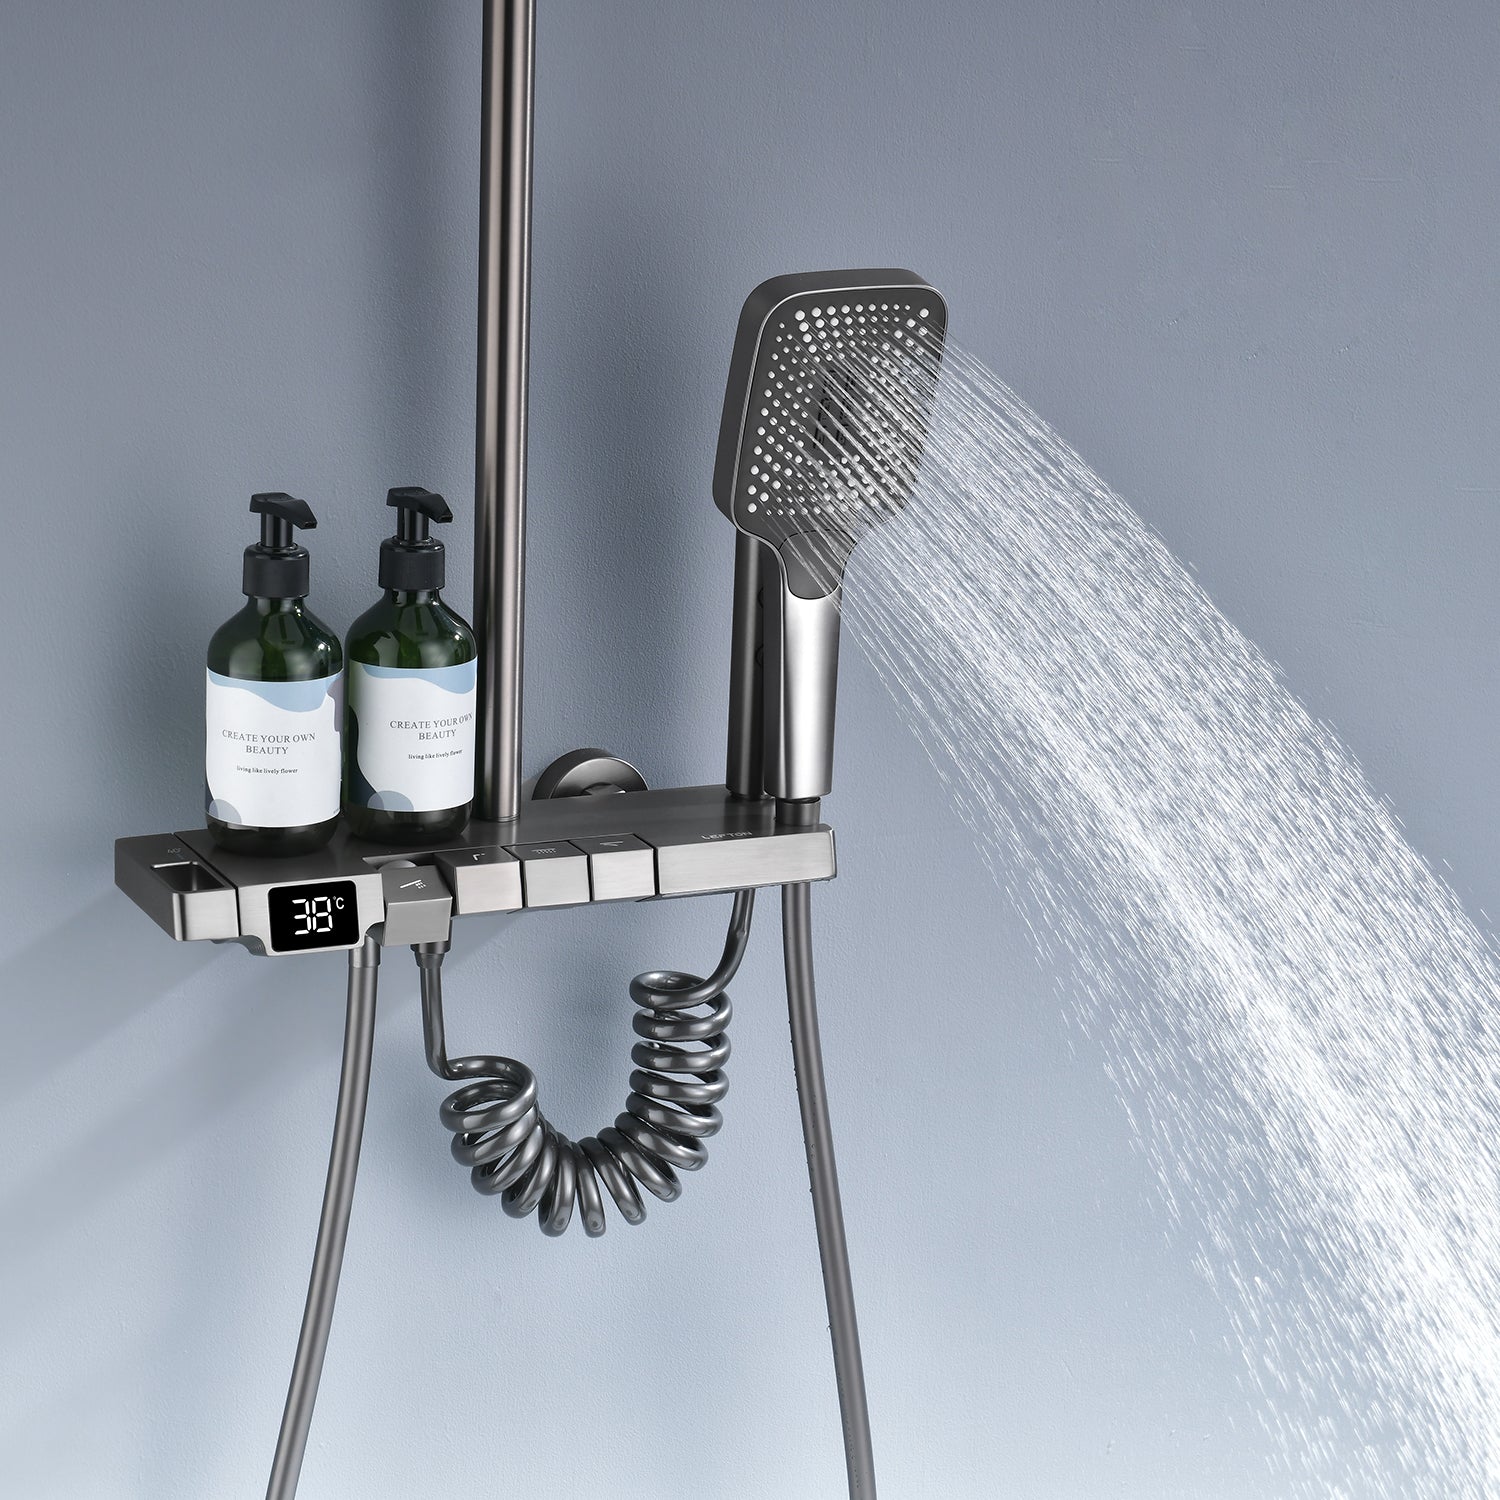 Lefton Piano Key Design Thermostatic Shower System with Temperature Display